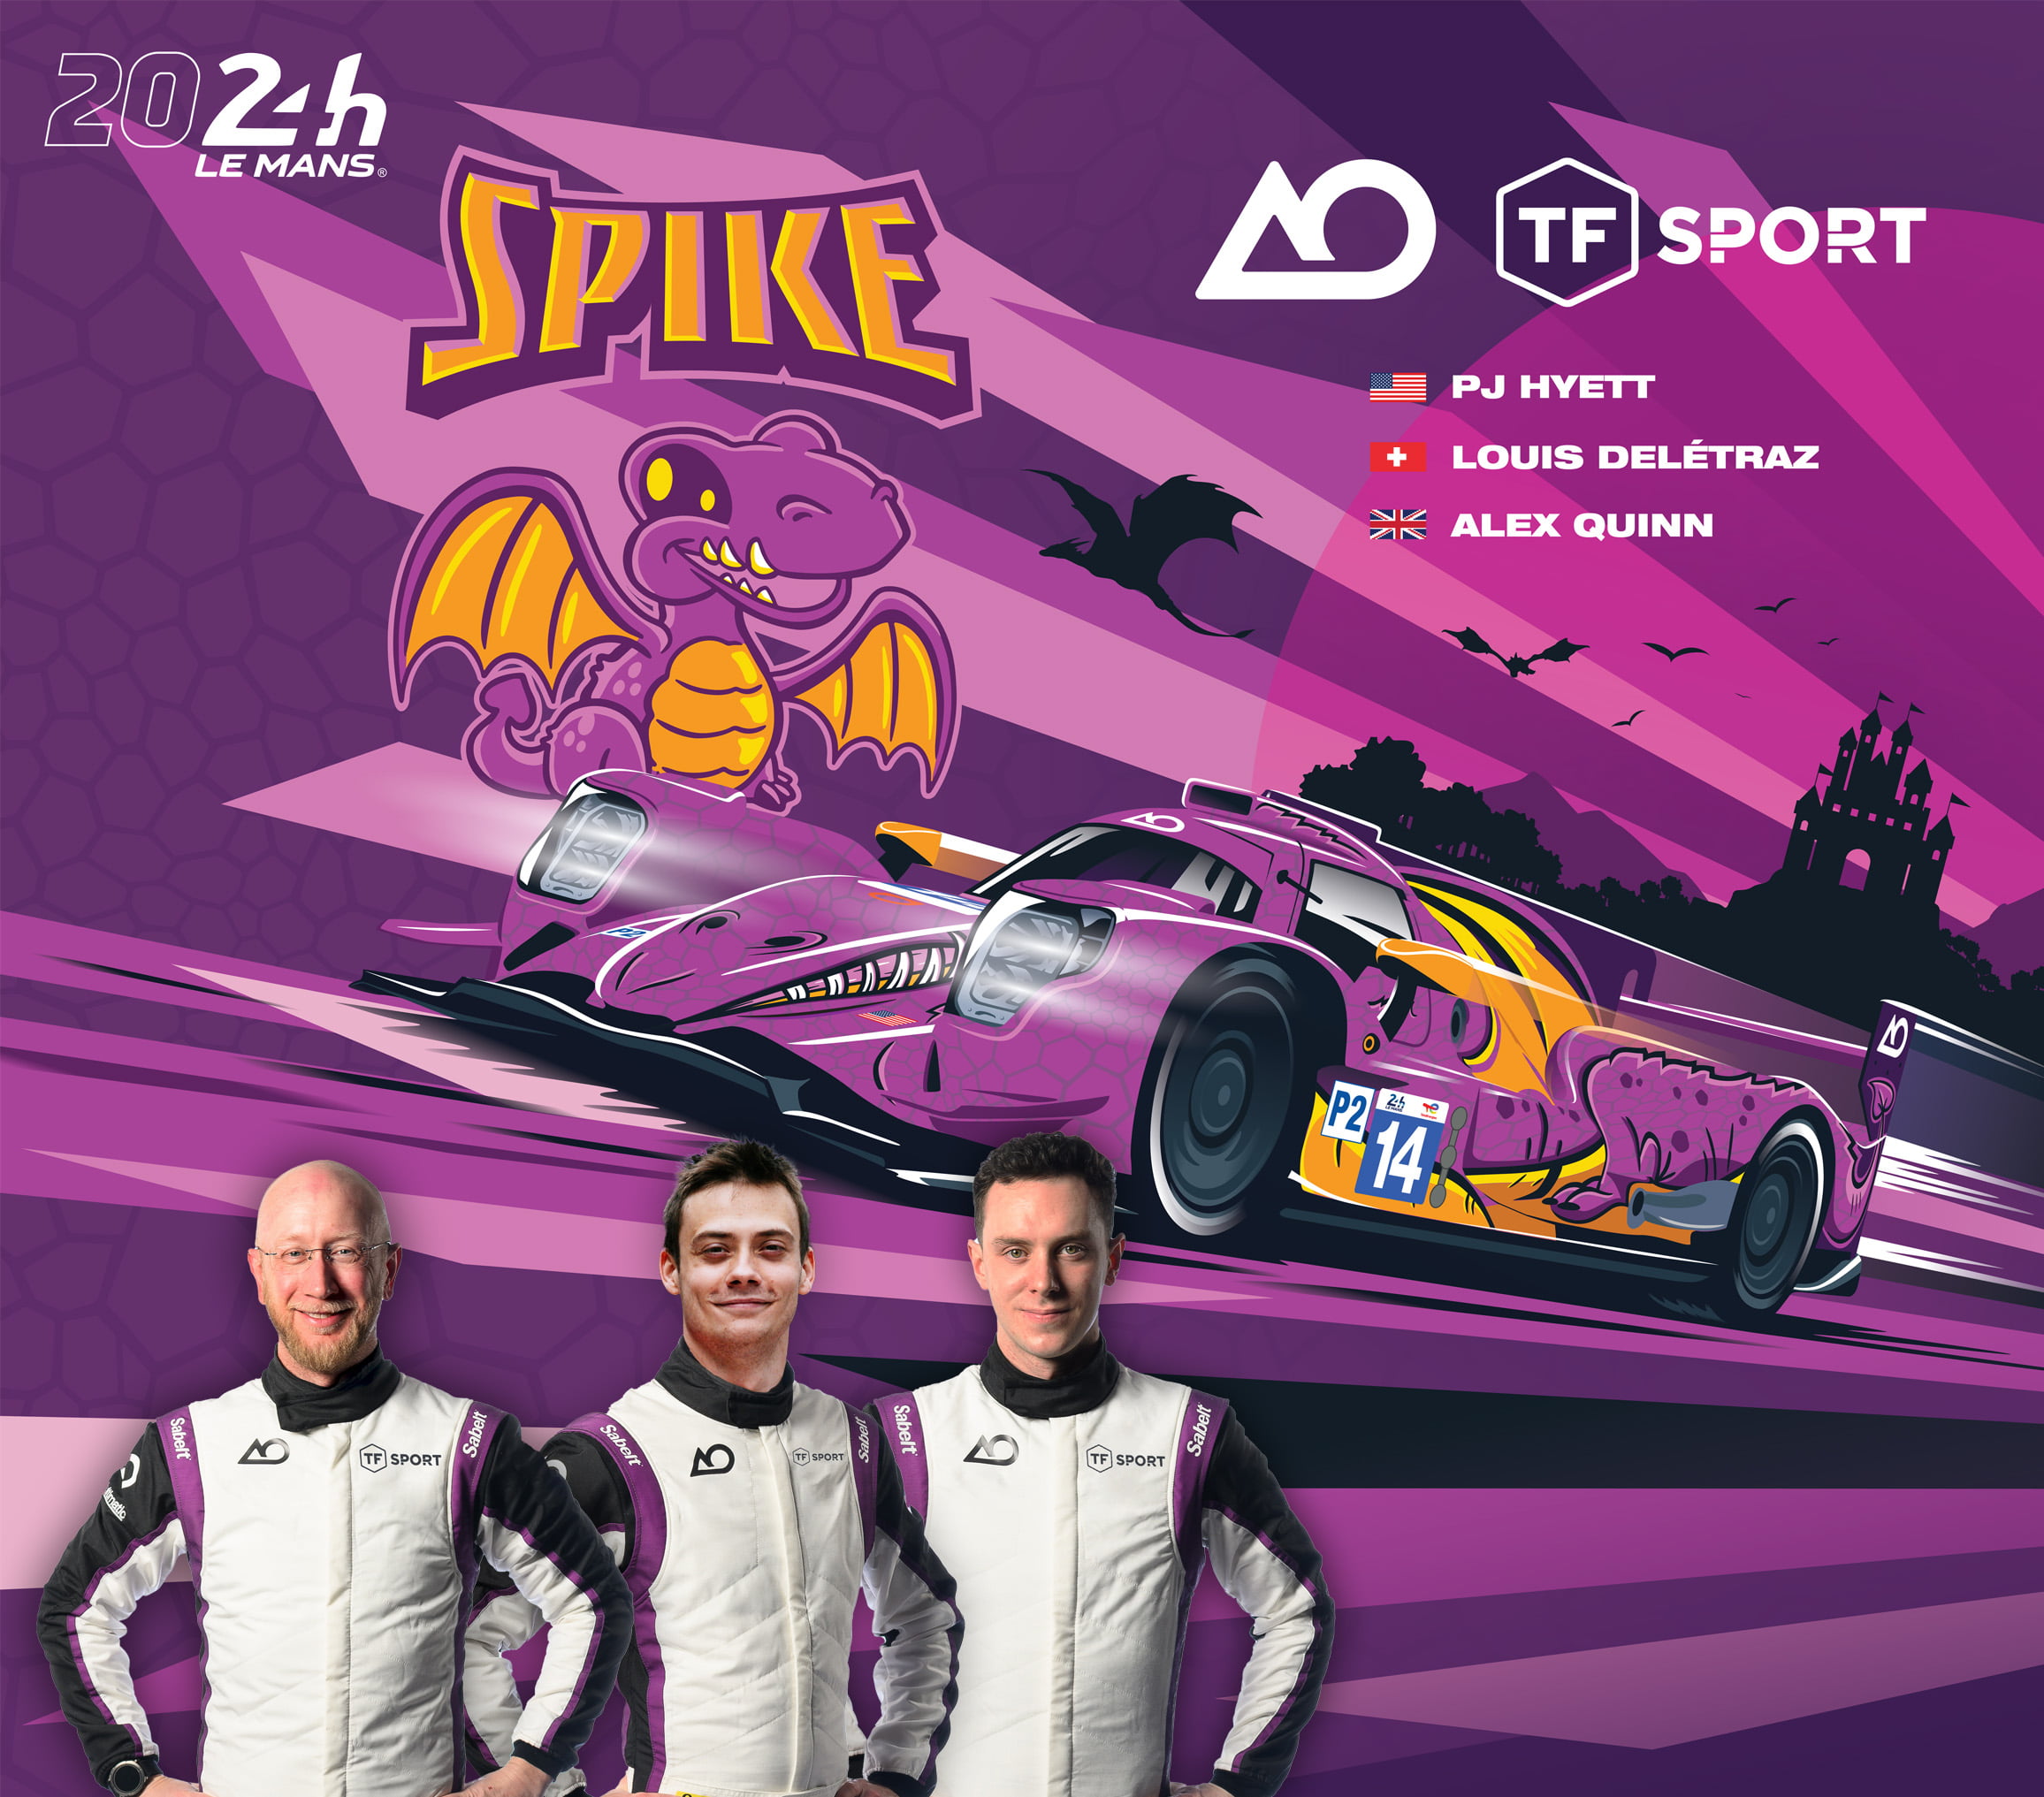 AO Racing to Make Le Mans Return with Spike the Dragon, Partners with TF Sport